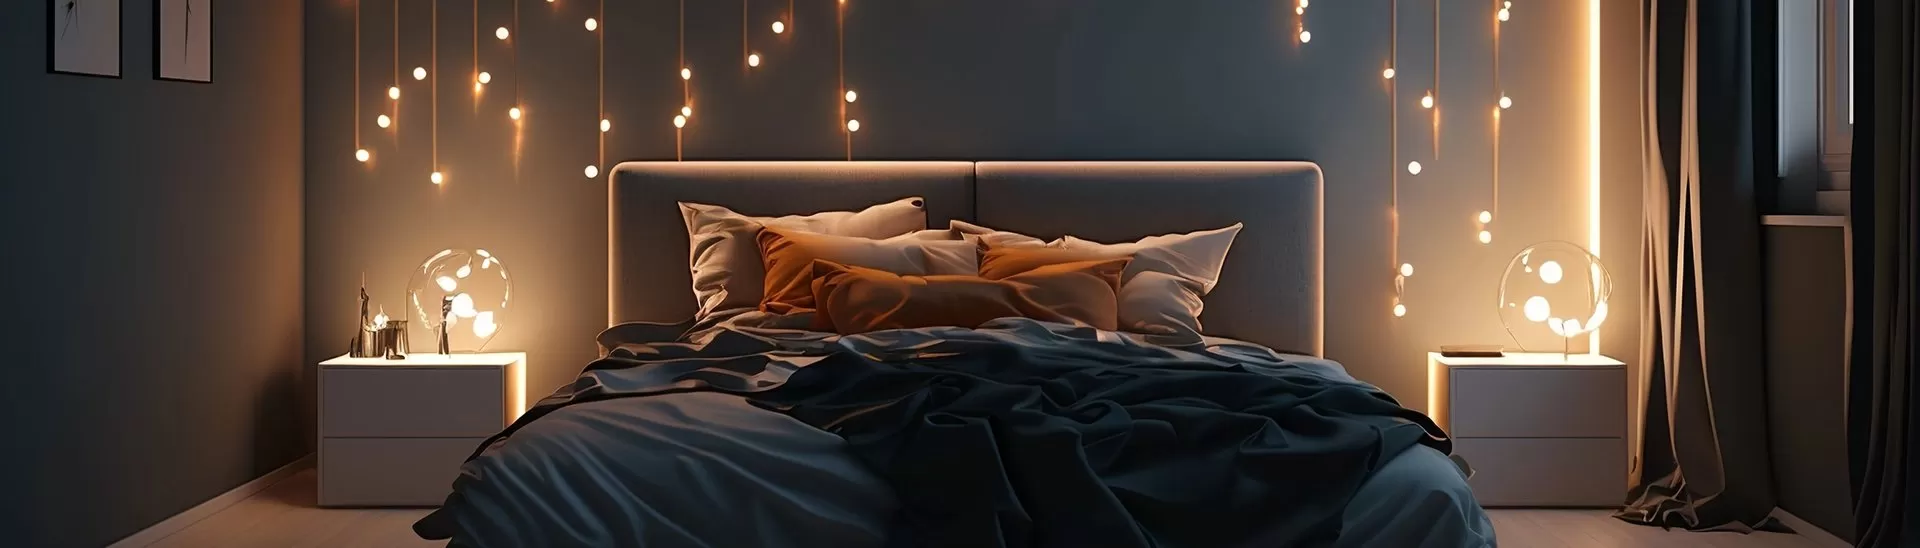 Elevate Your Bedroom's Style with Striking LED Wall Panel Designs 